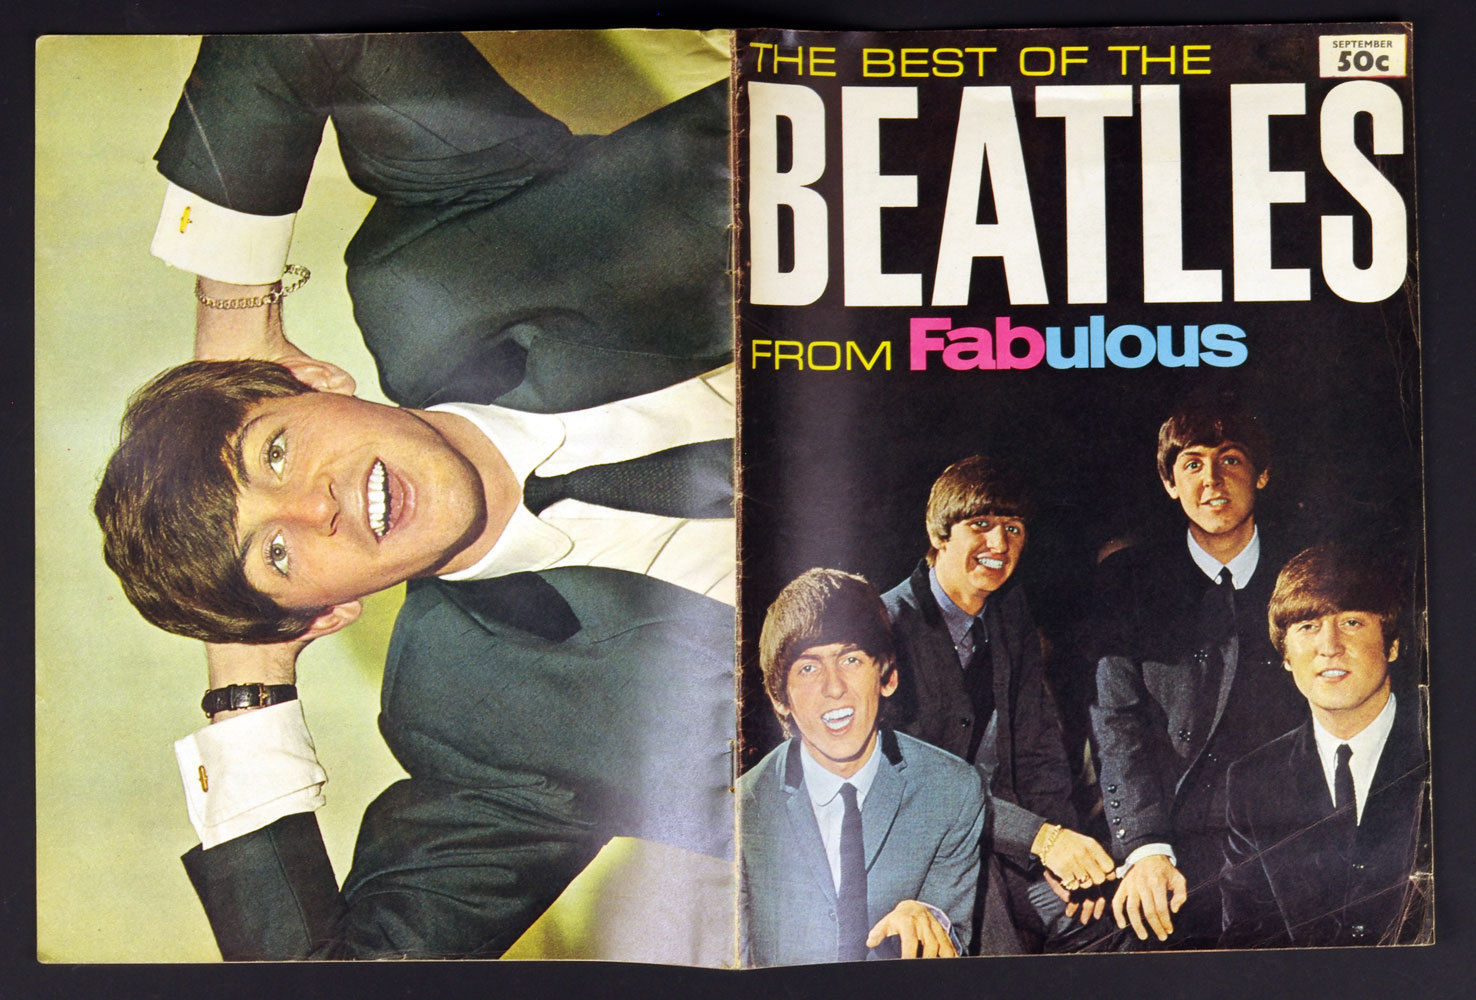 The Beatles Book The Best Of The Beatles From Fabulous 1964 Sep